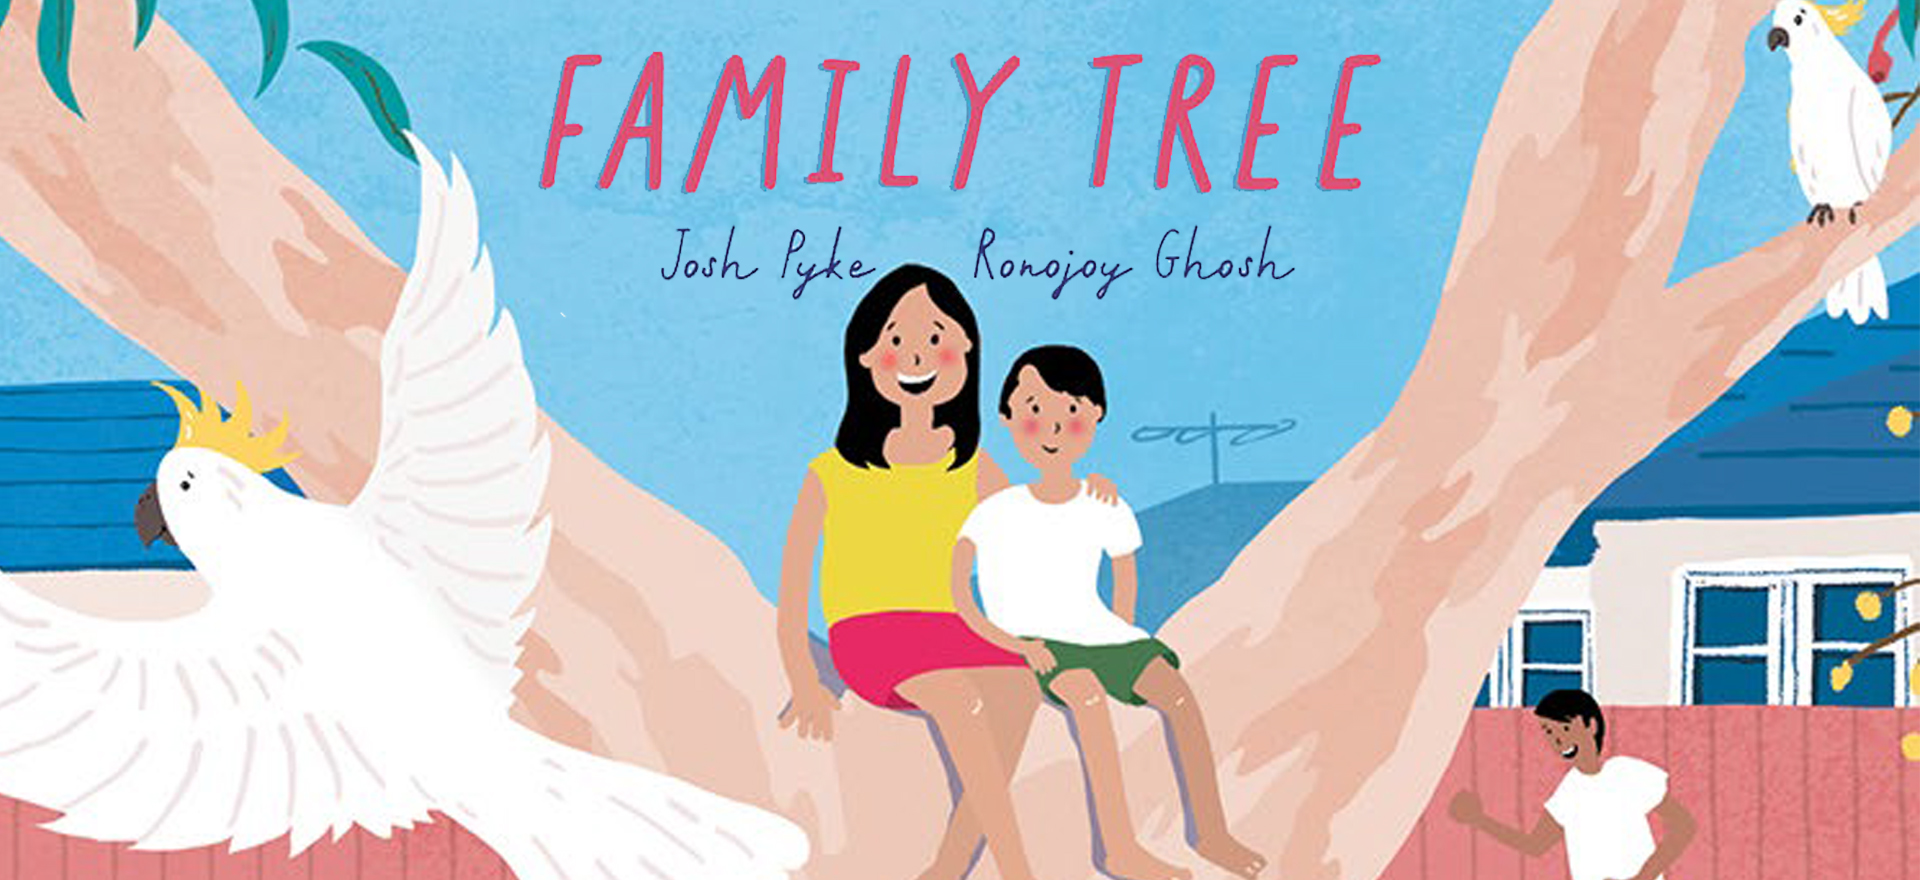 Illustration of woman and young boy sitting on a tree, a cockatoo flying pass them text reads family tree by Josh Pyke and Ronojoy Ghosh